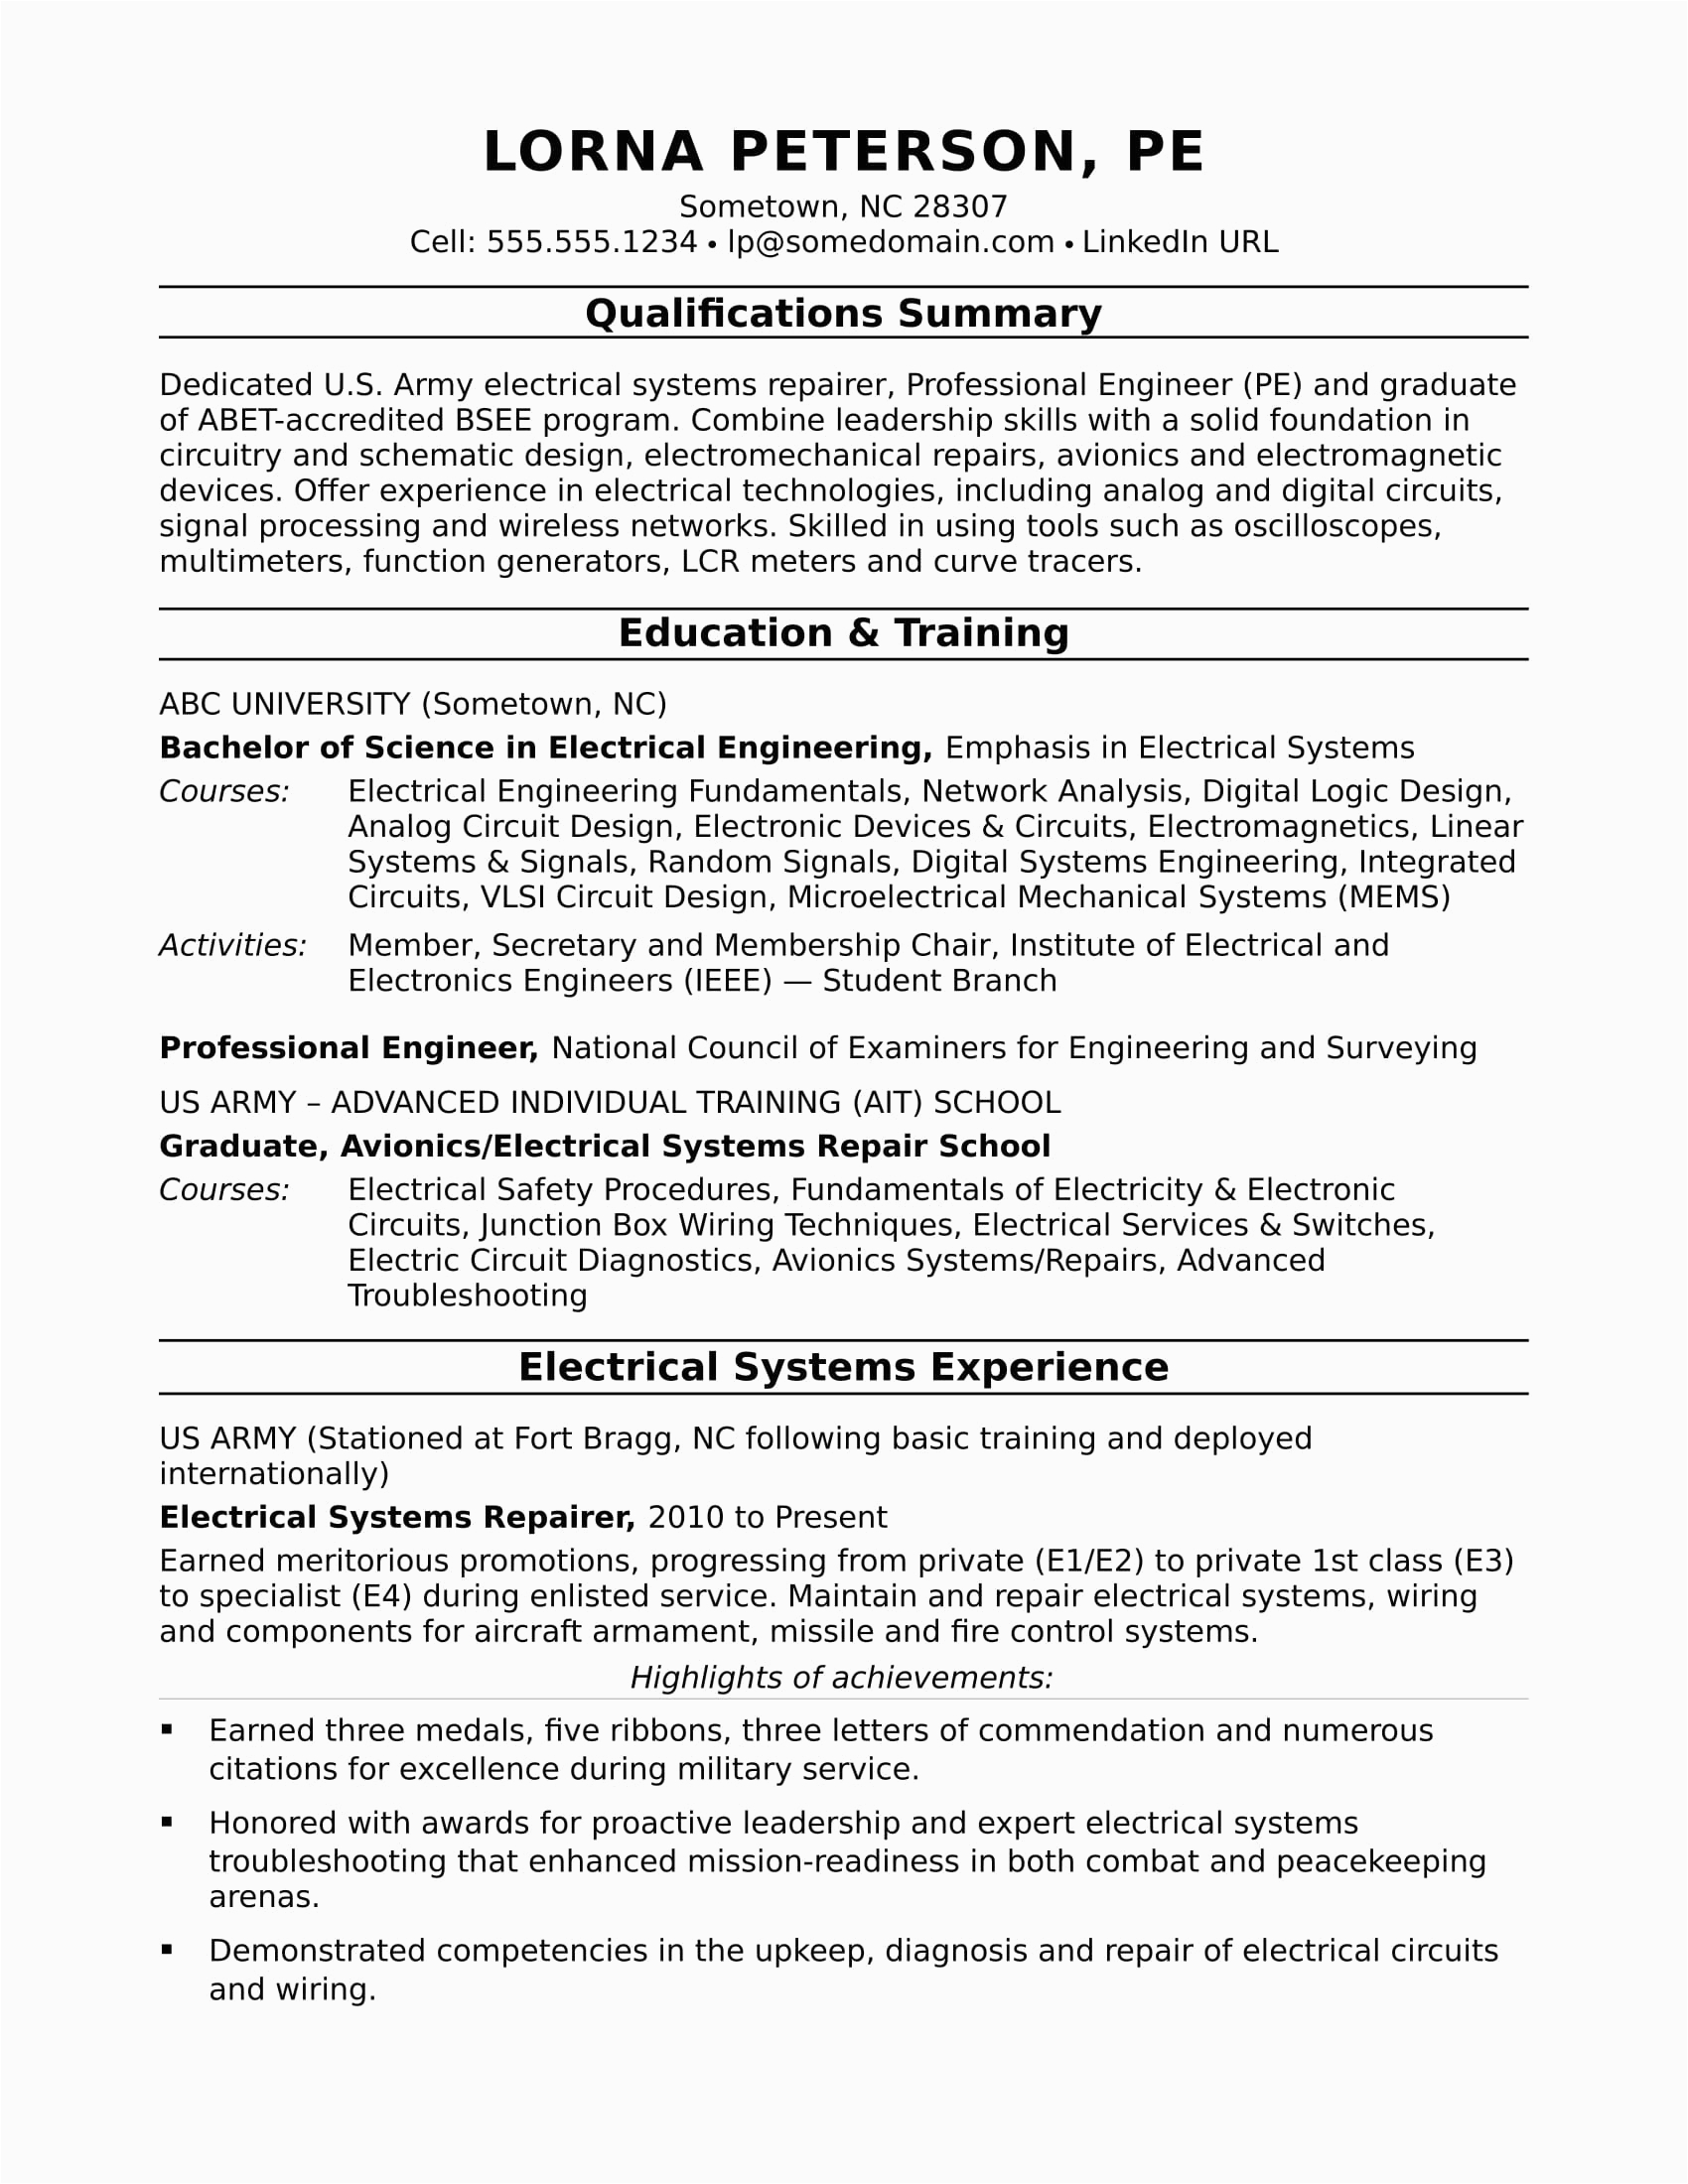 Experience Resume Sample for Electrical Engineer Sample Resume for A Midlevel Electrical Engineer